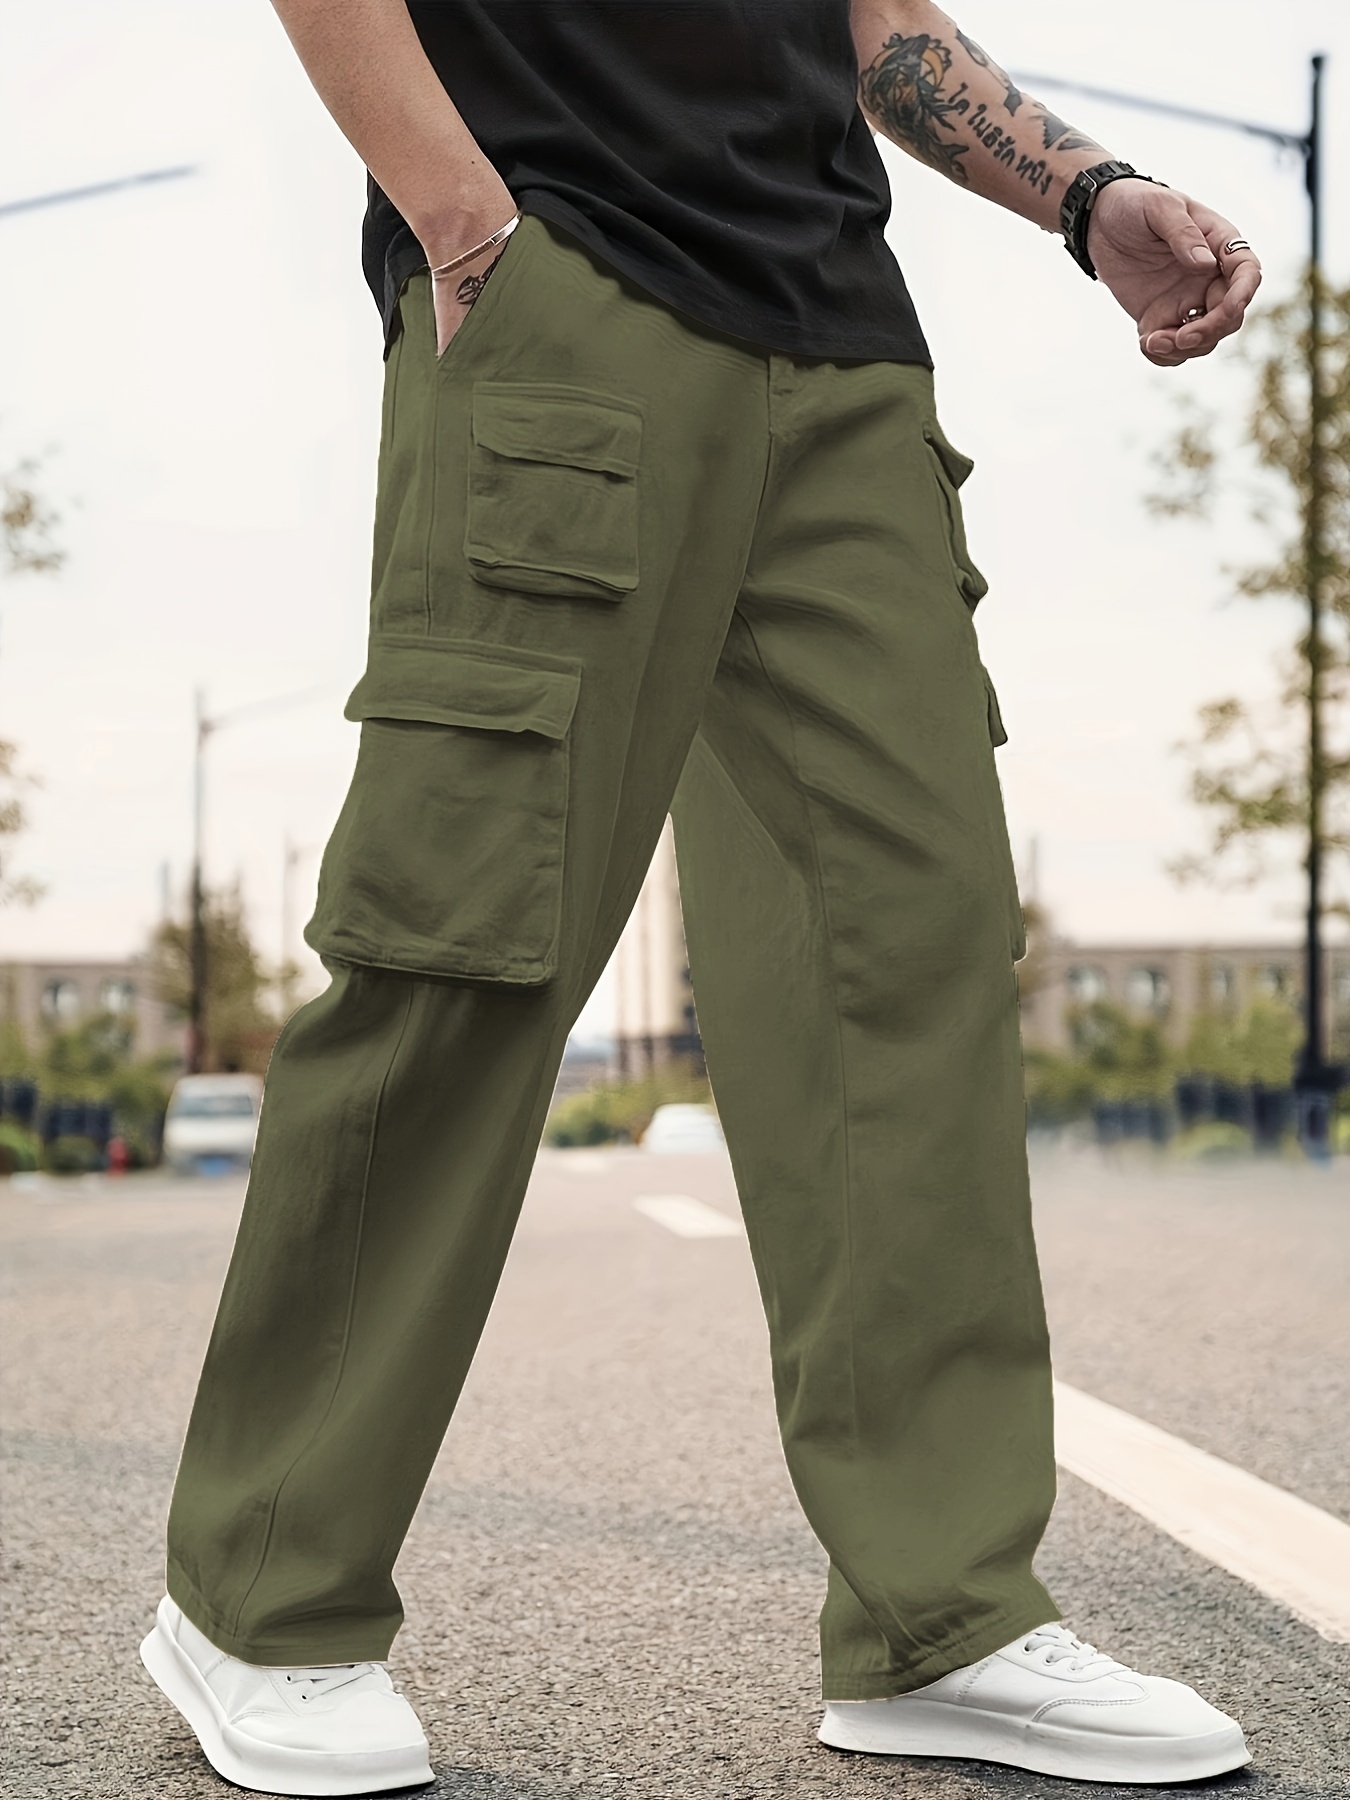 Army Green Cargo Pants Mens Baggy Summer Multi-pocket Loose Casual